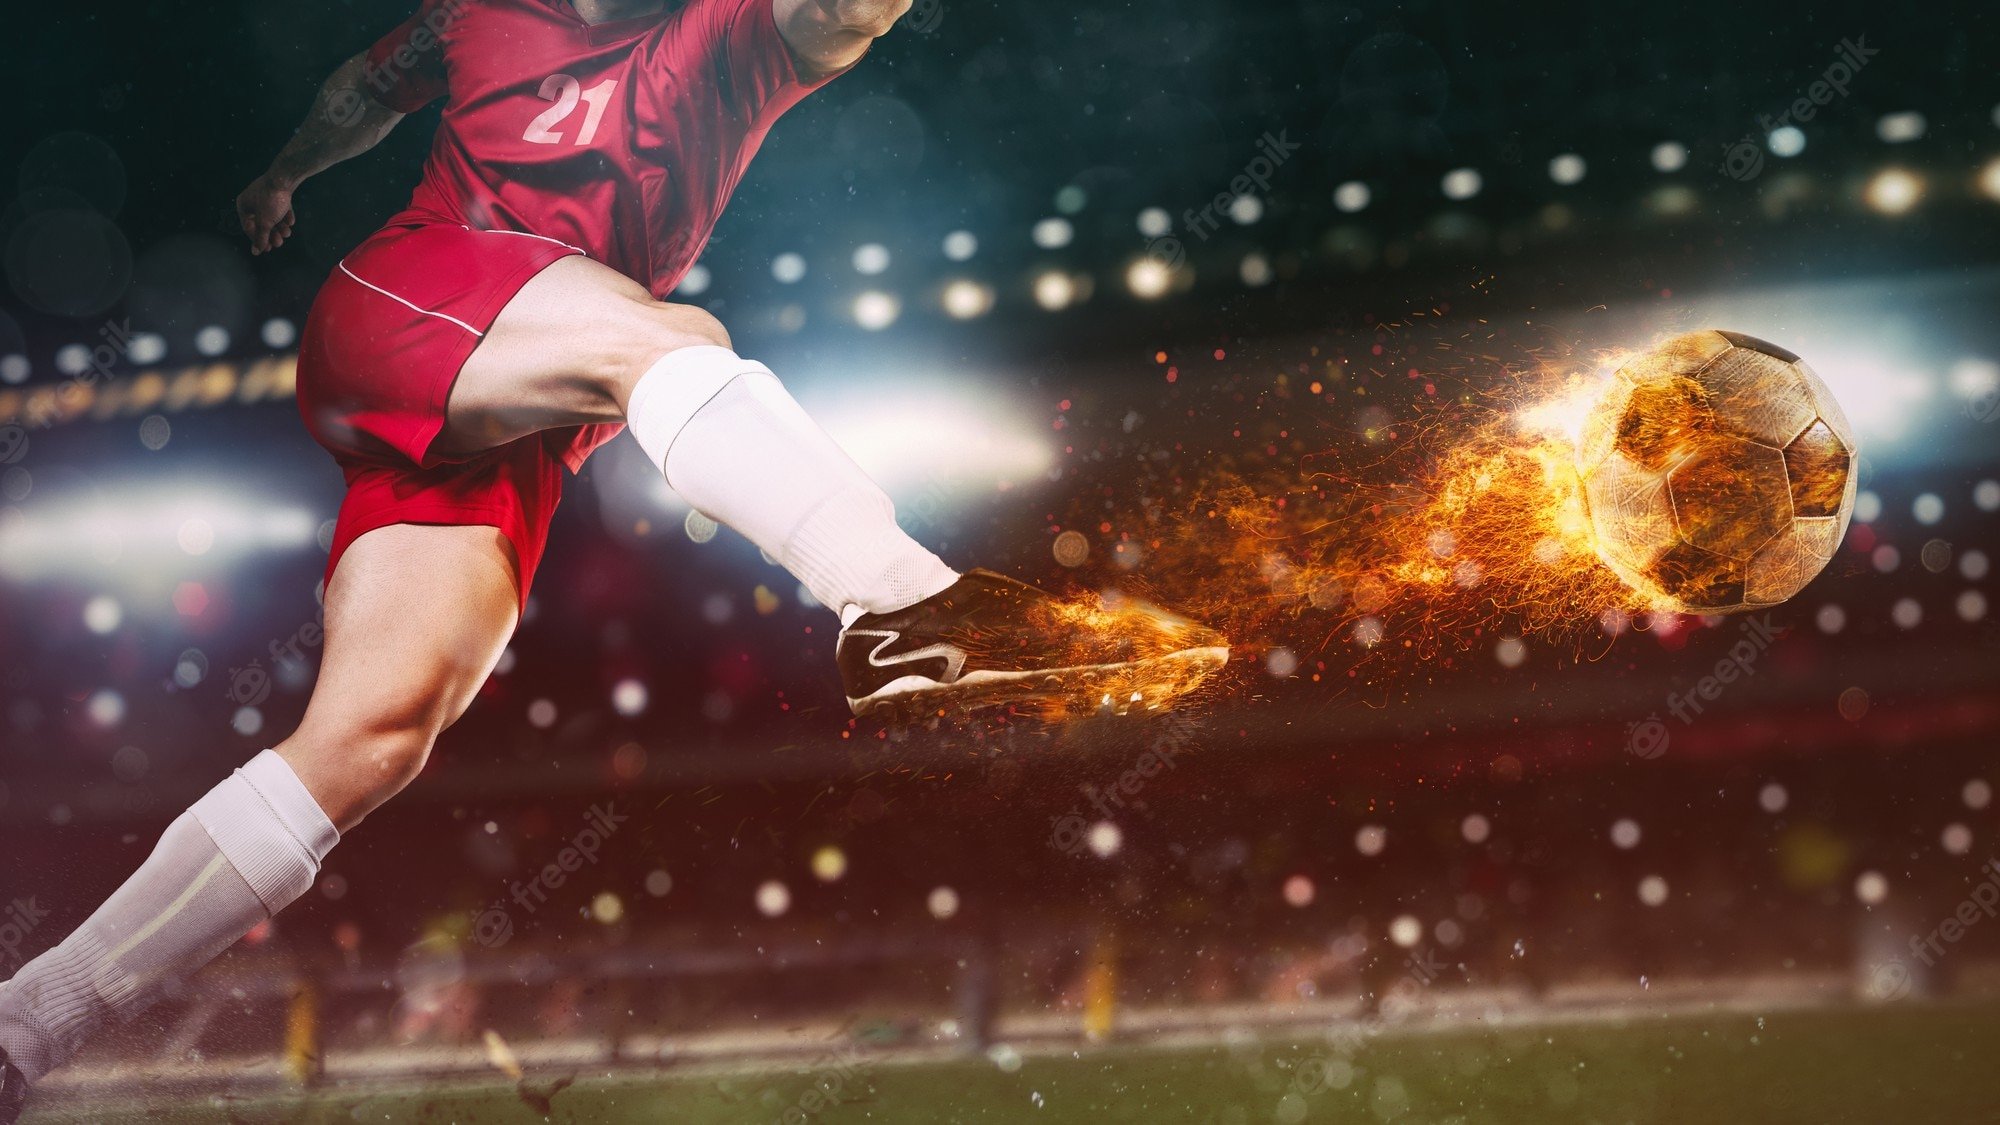 Soccer fire Image. Free Vectors, & PSD